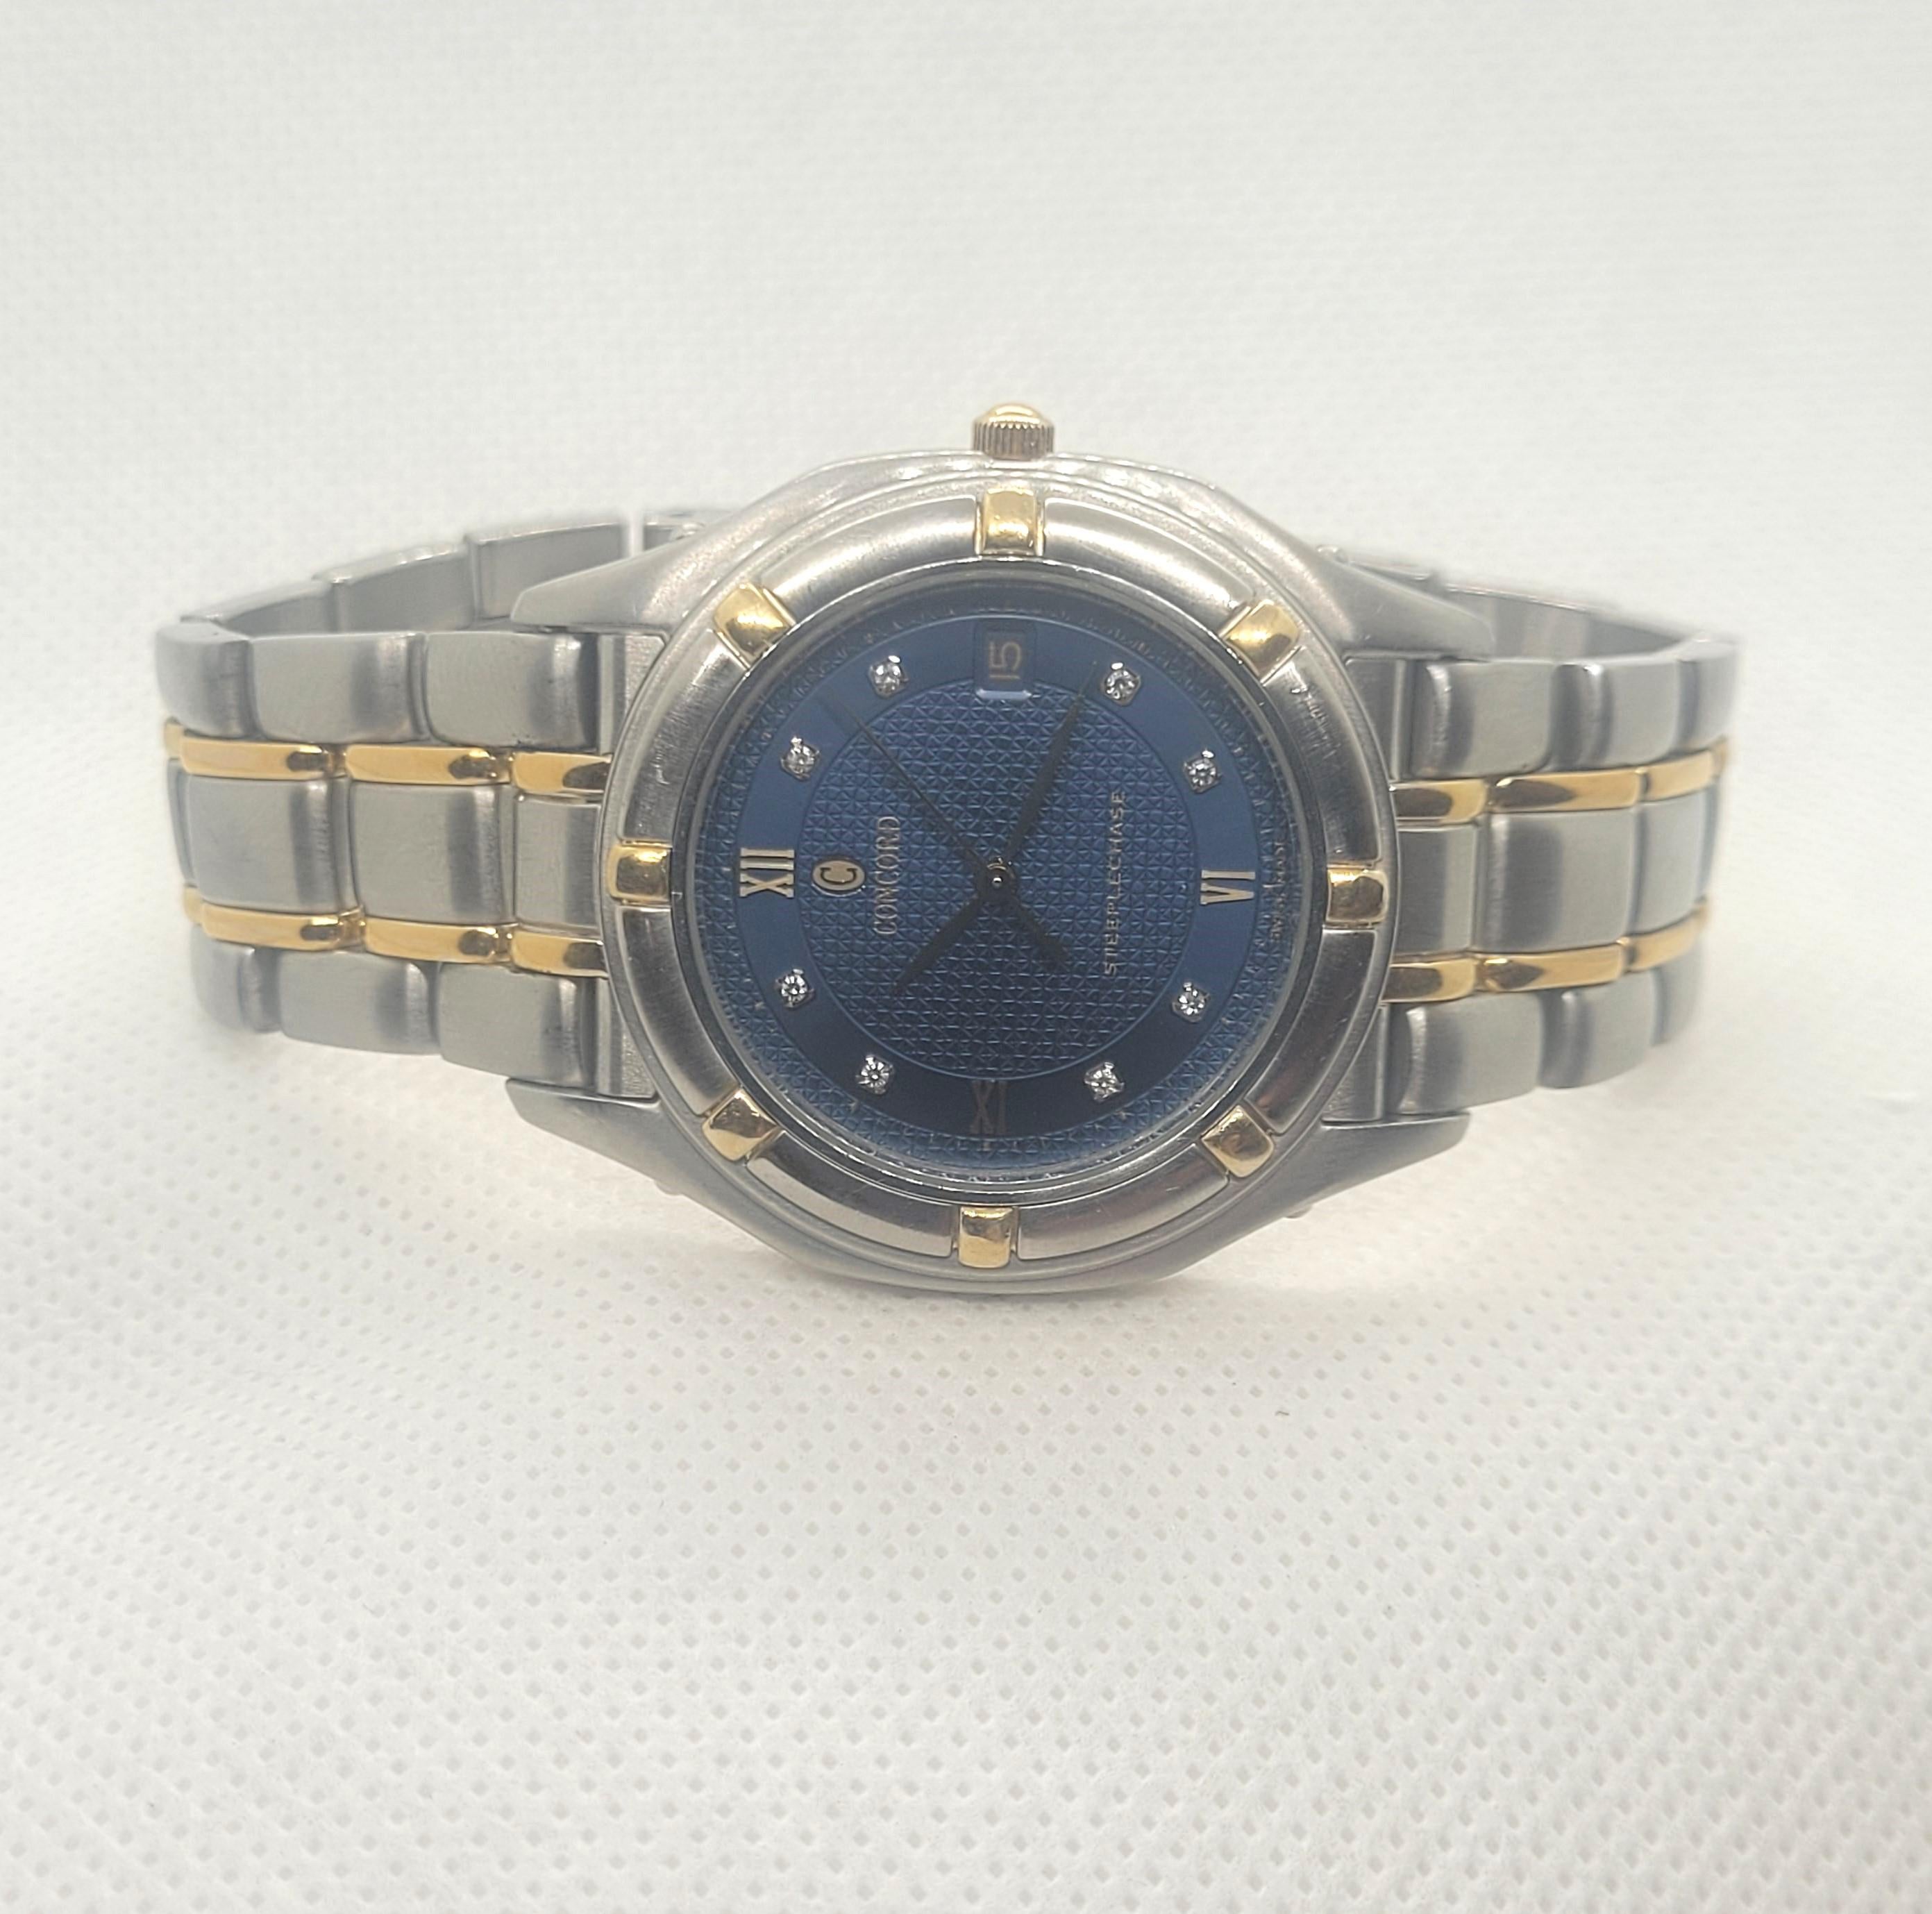 Stainless Steel 18kt Yellow Gold Men's Concord Watch Serviced Warranty 15.65.221 In Good Condition For Sale In Rancho Santa Fe, CA